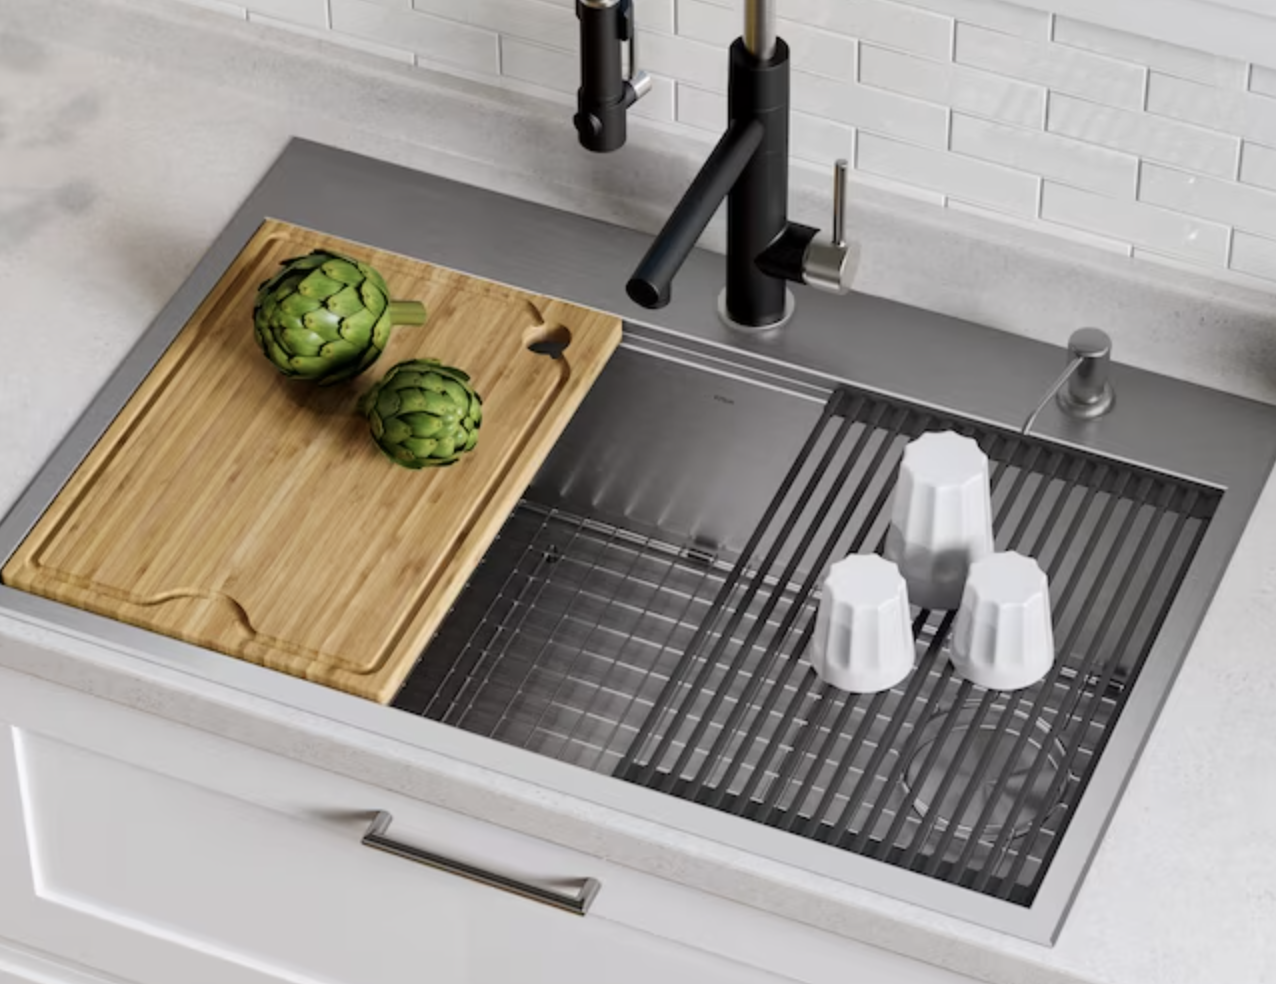 workstation kitchen sink with one side for prepping veggies and the other for drying dishes